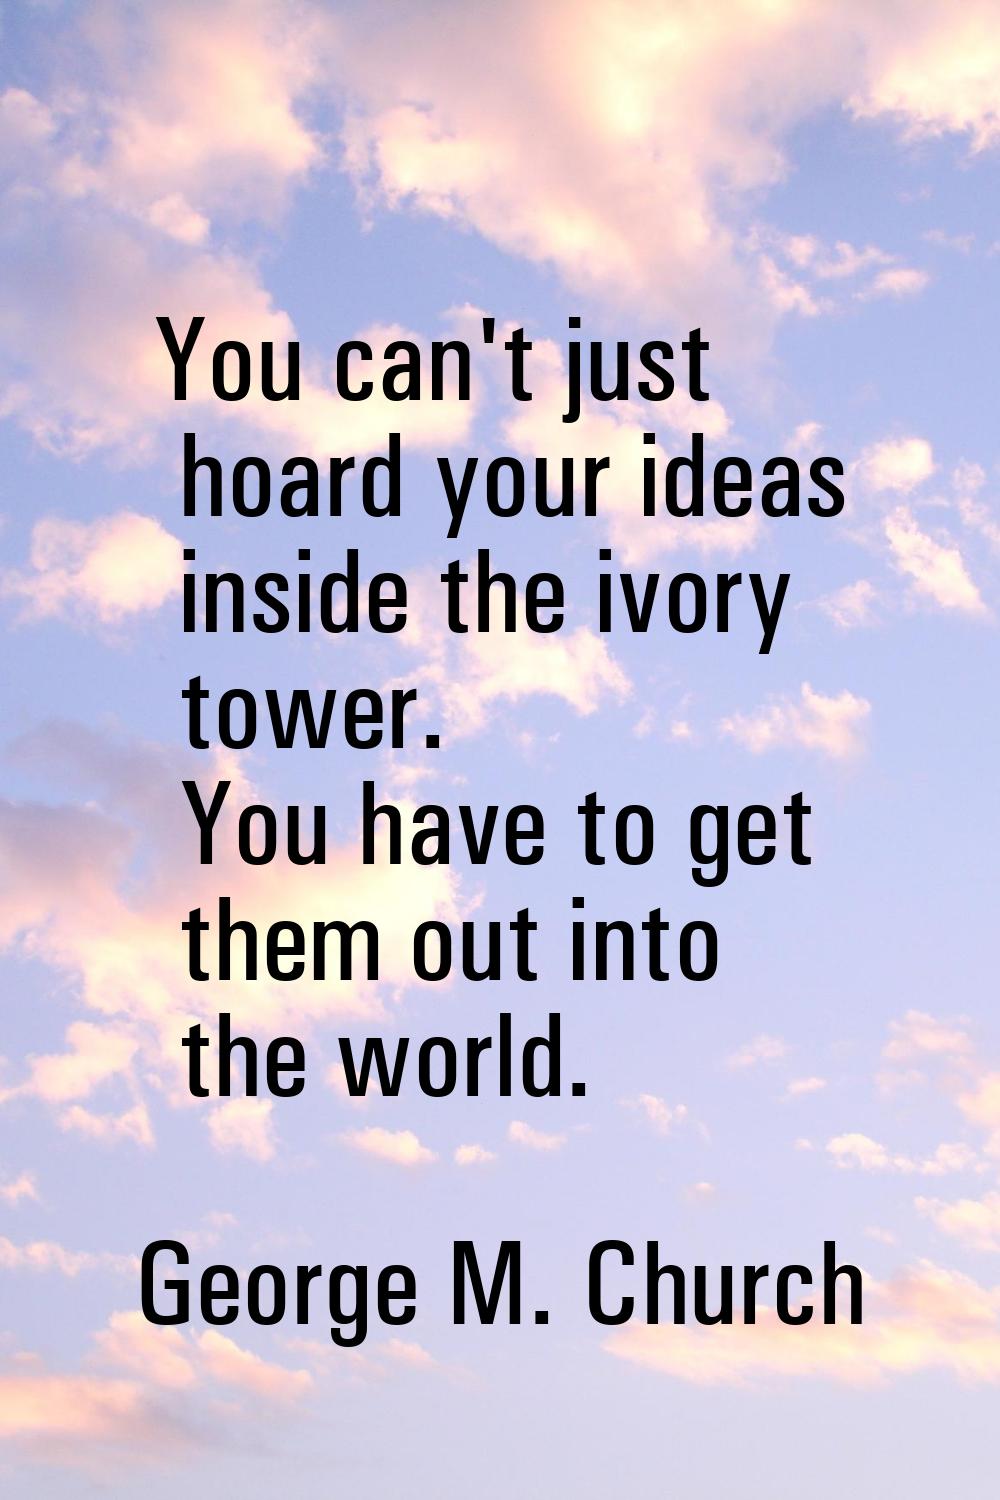 You can't just hoard your ideas inside the ivory tower. You have to get them out into the world.